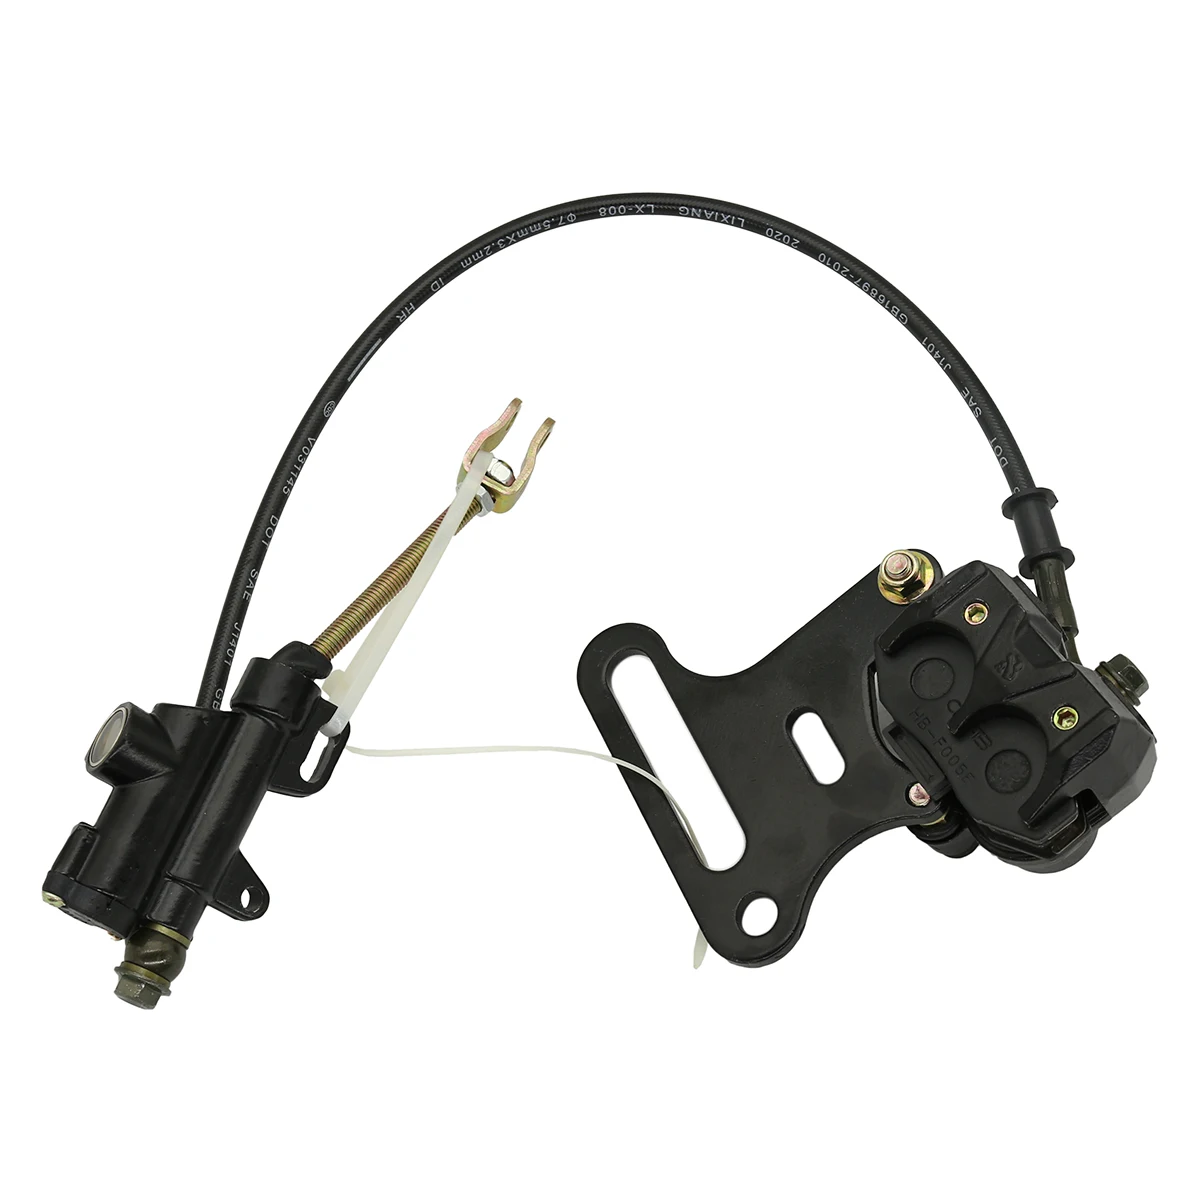 

Hydraulic Rear Disc Brake Master Cylinder Caliper System for 110cc 125cc Motorcycle Scooter Moped Dirt Pit Bike